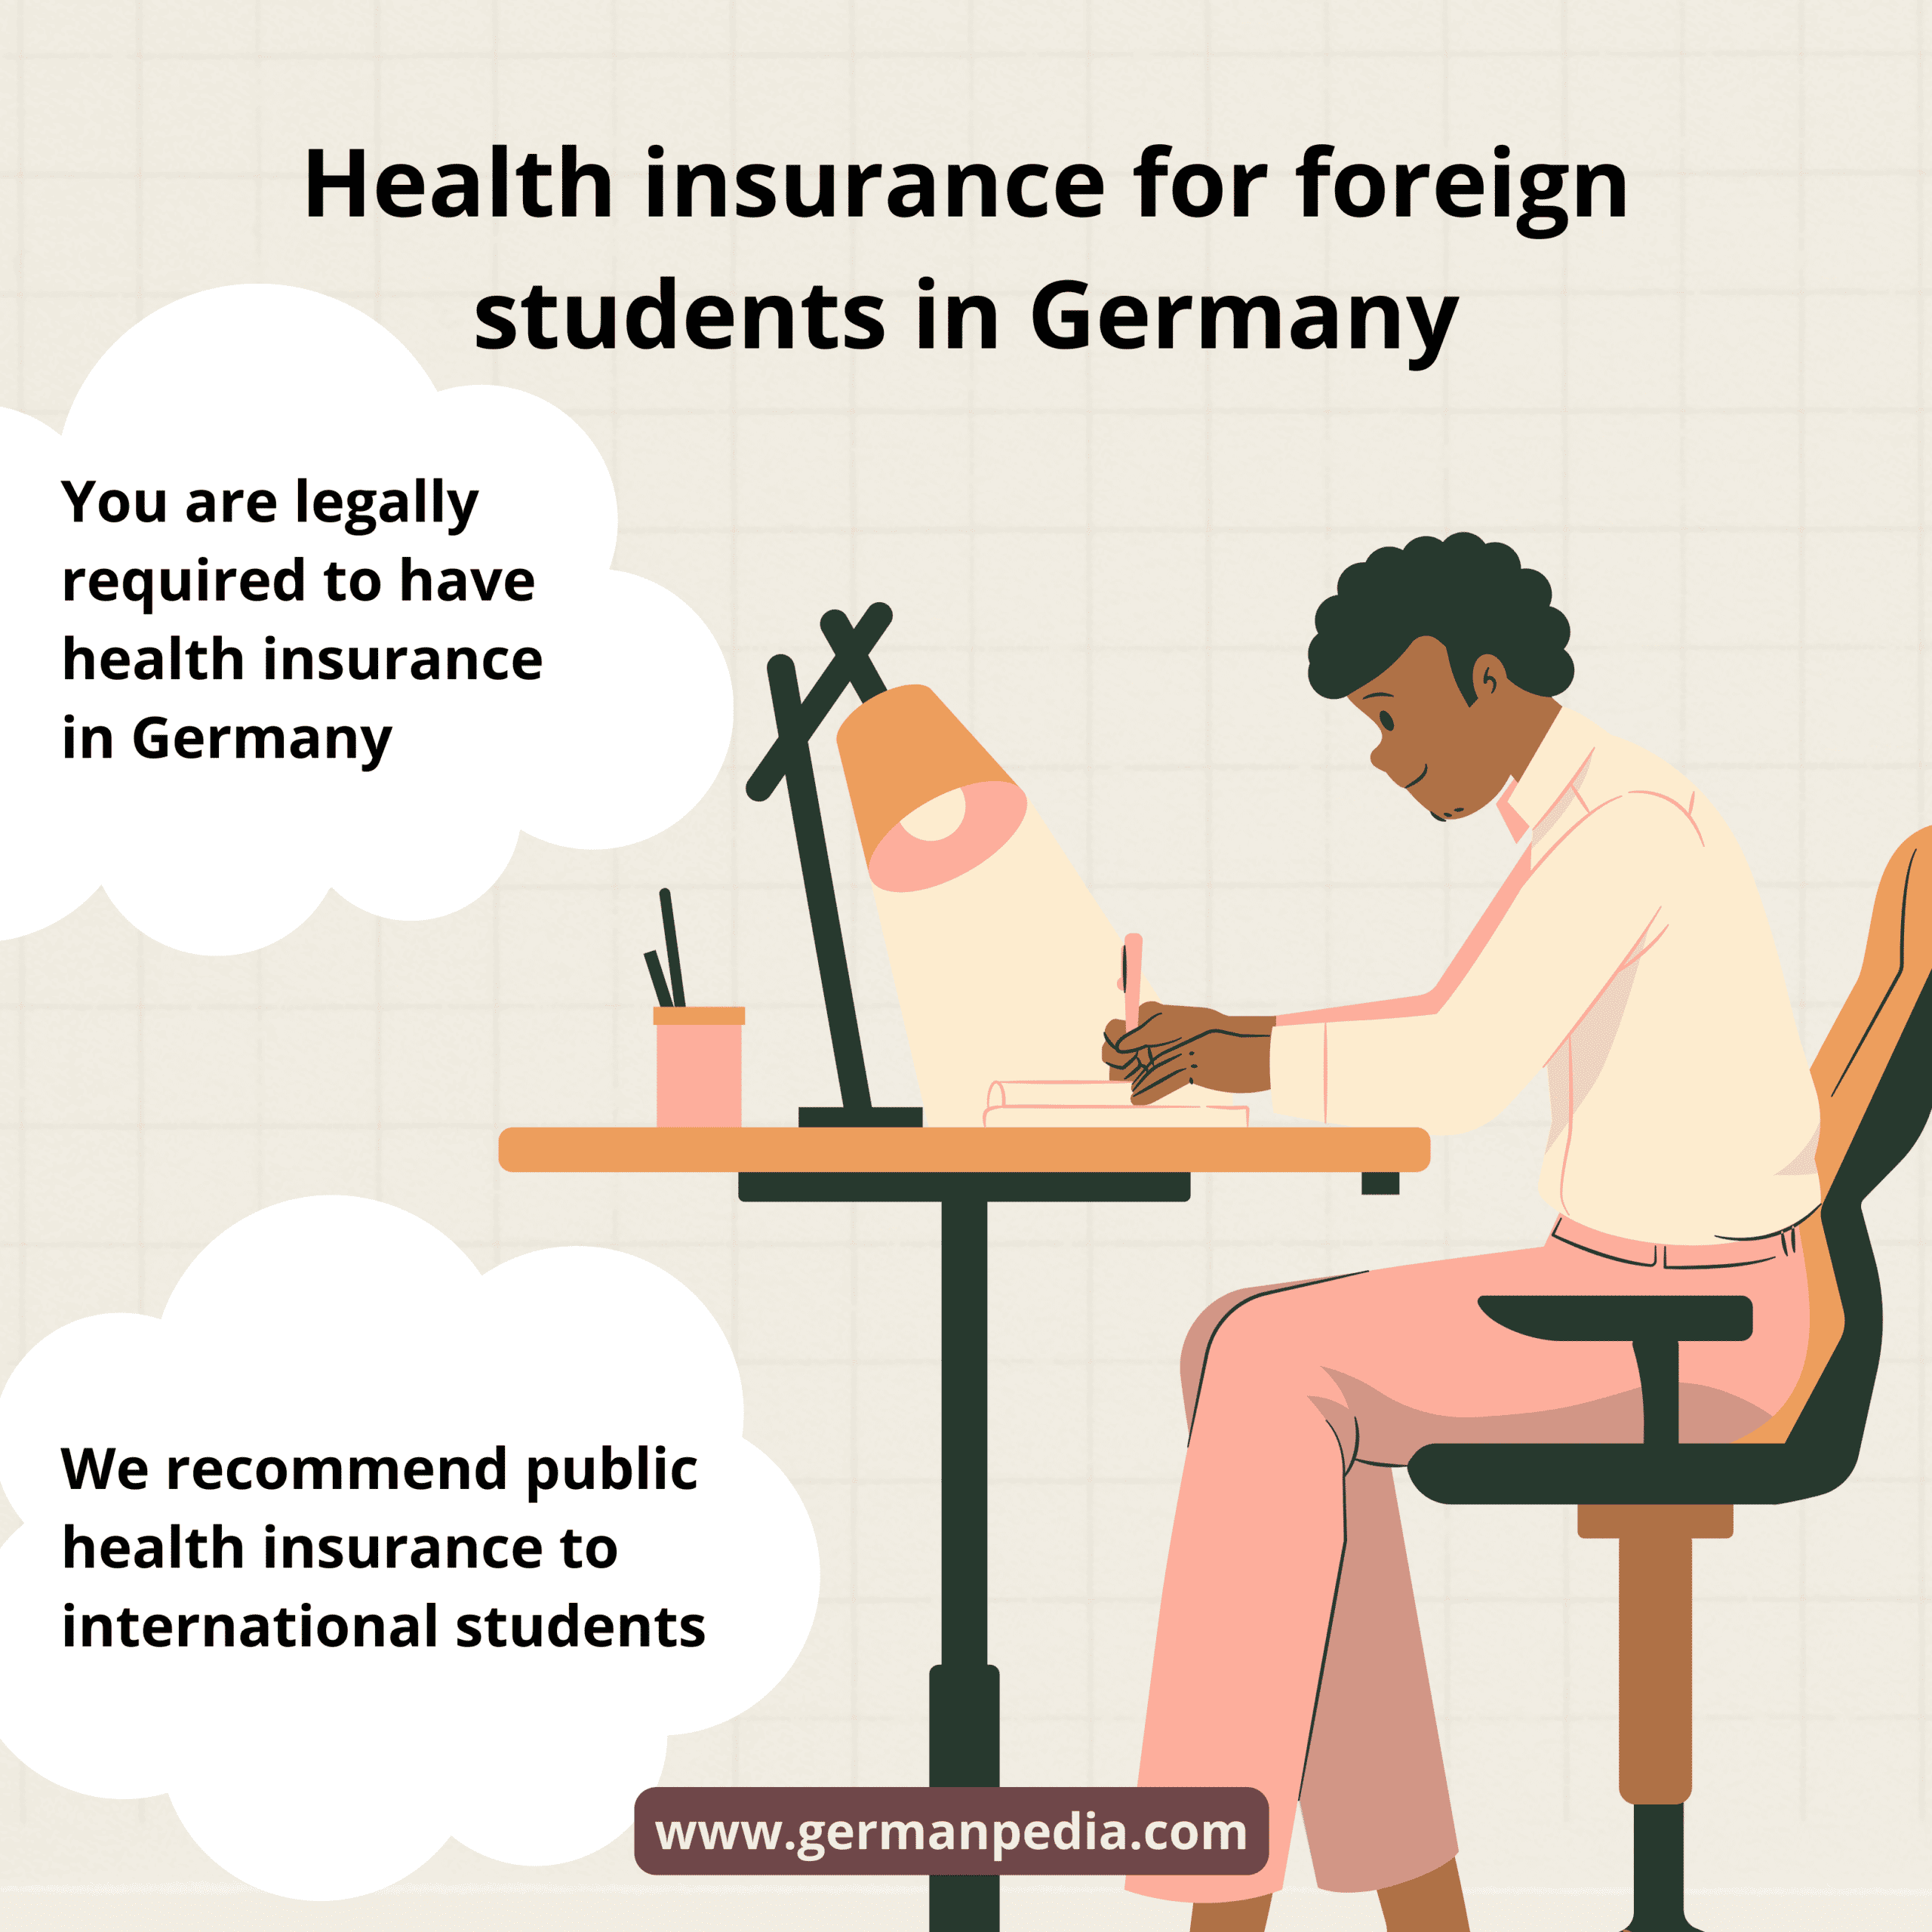 Health insurance for foreign students in Germany